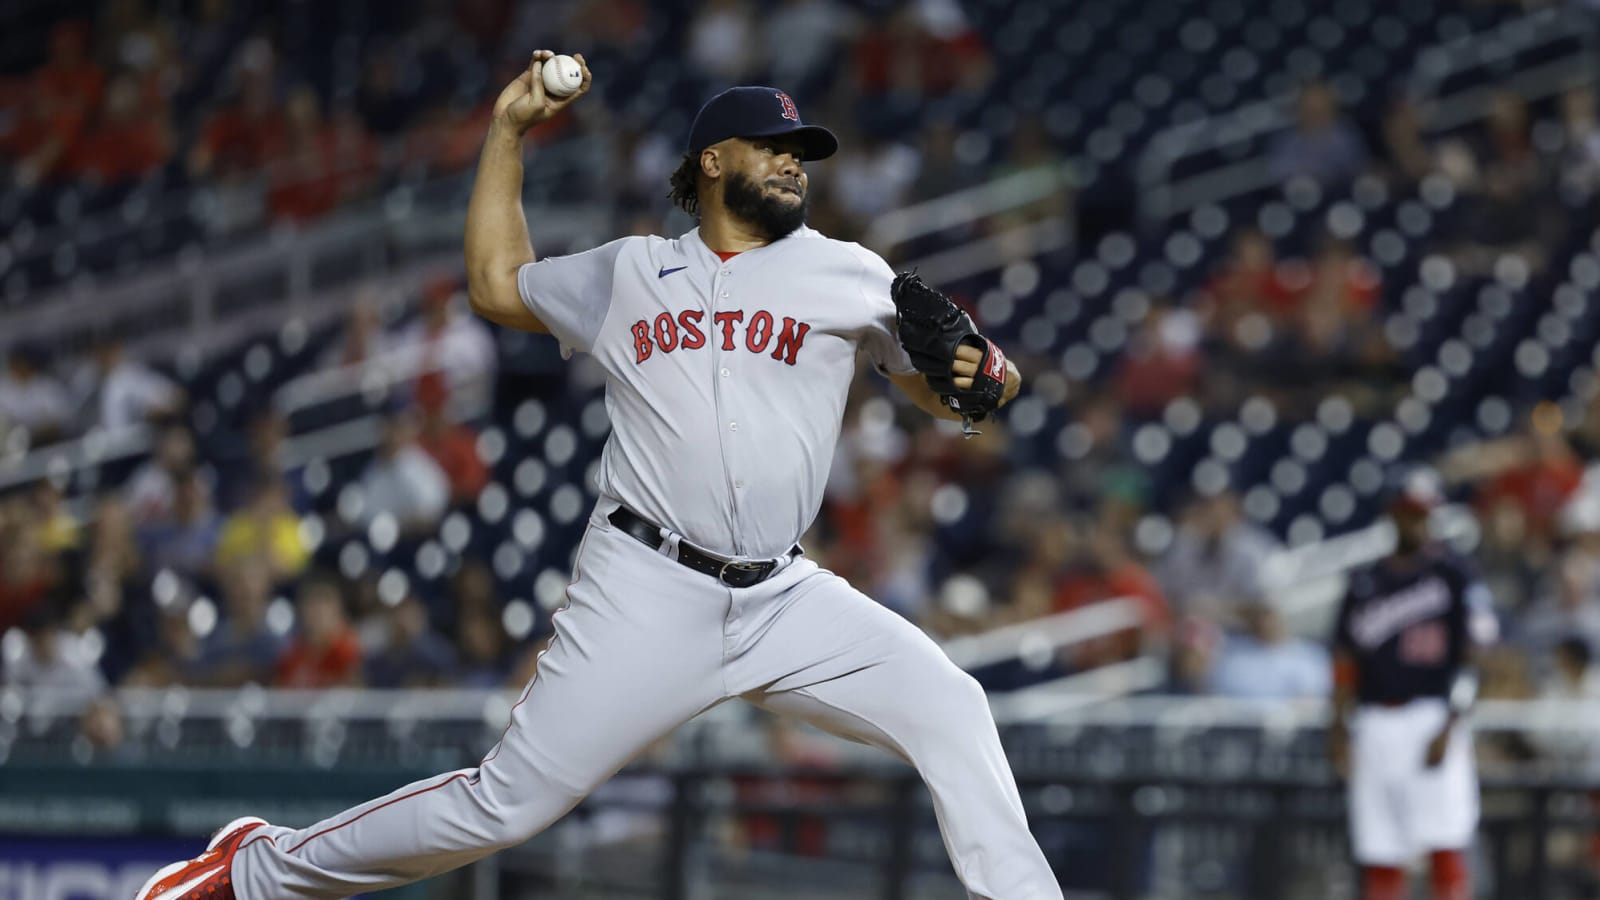 Red Sox likely to trade another All-Star pitcher?